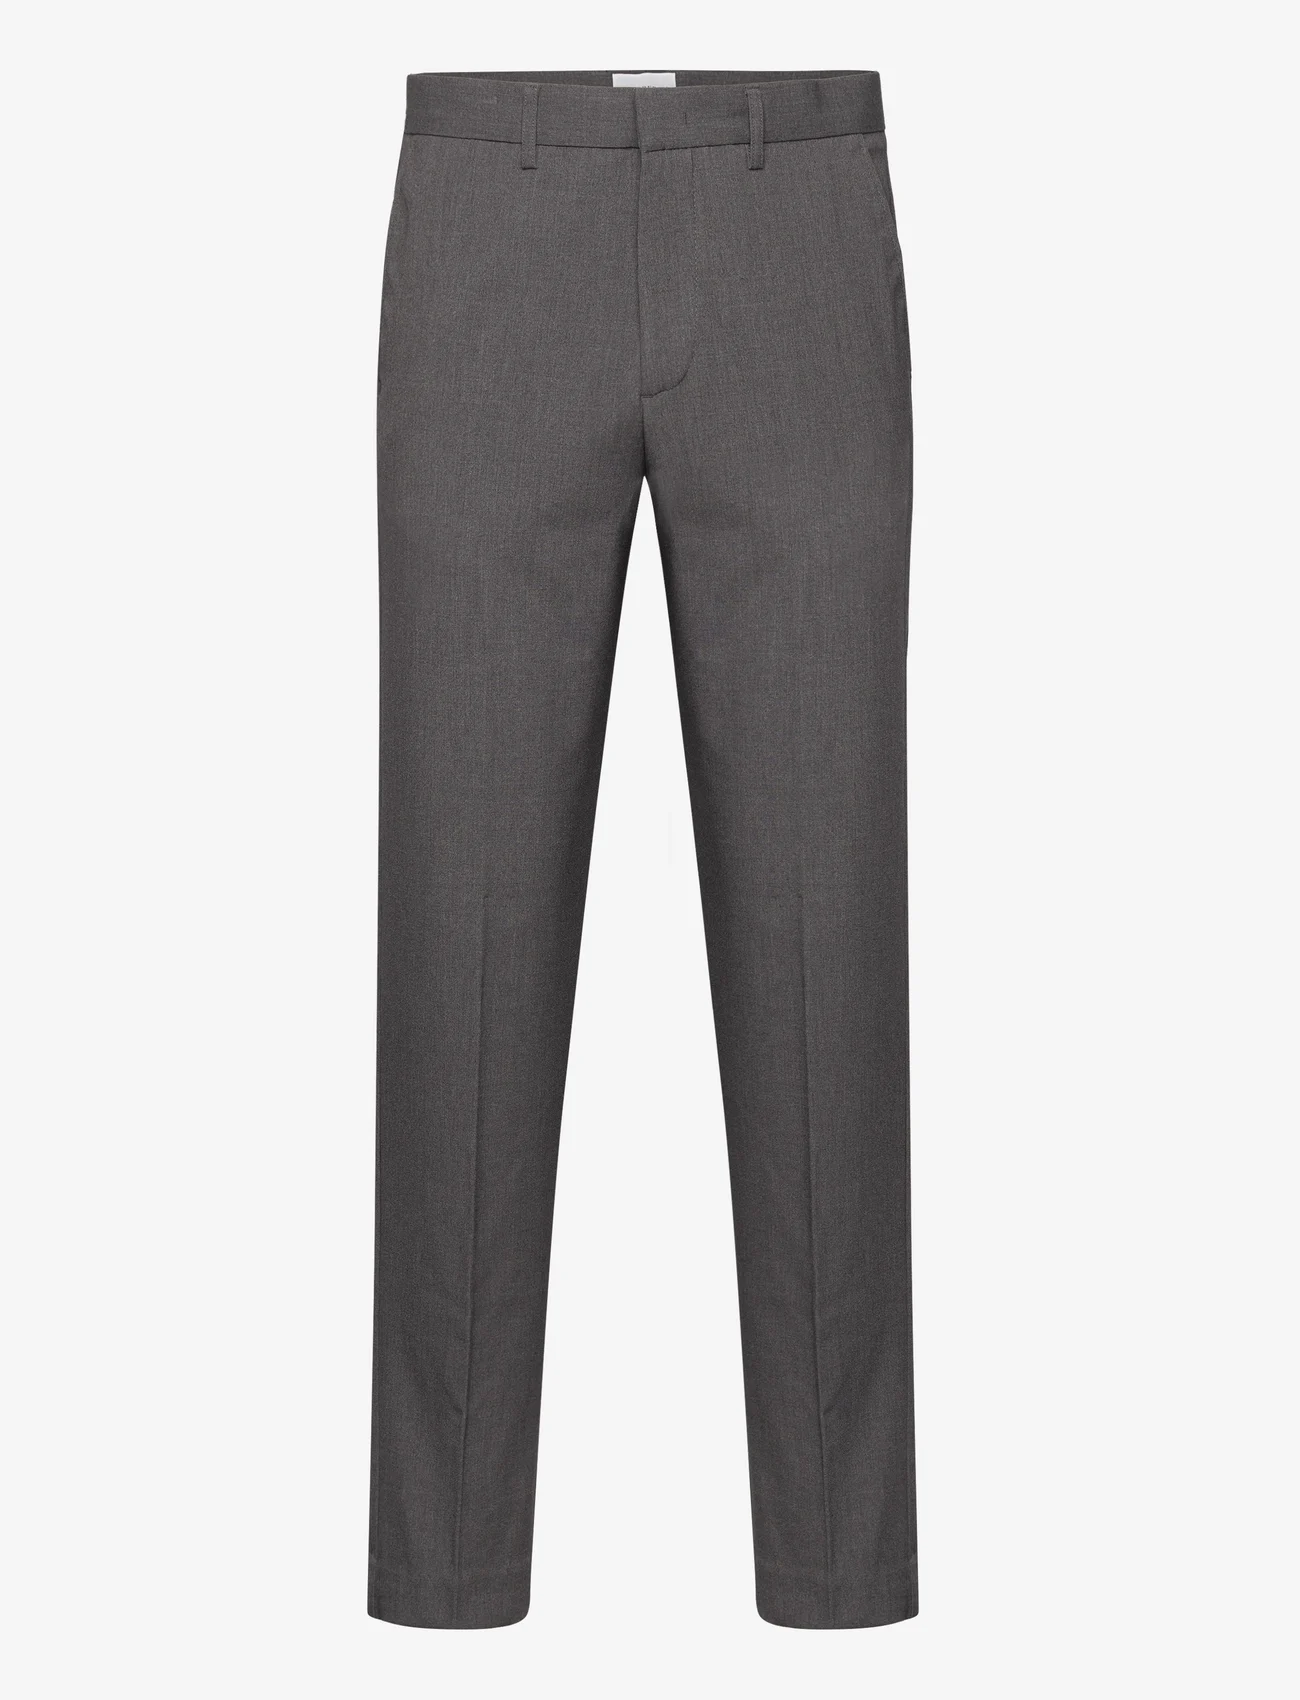 Lindbergh - Relaxed fit formal pants - anzugshosen - grey mix - 0